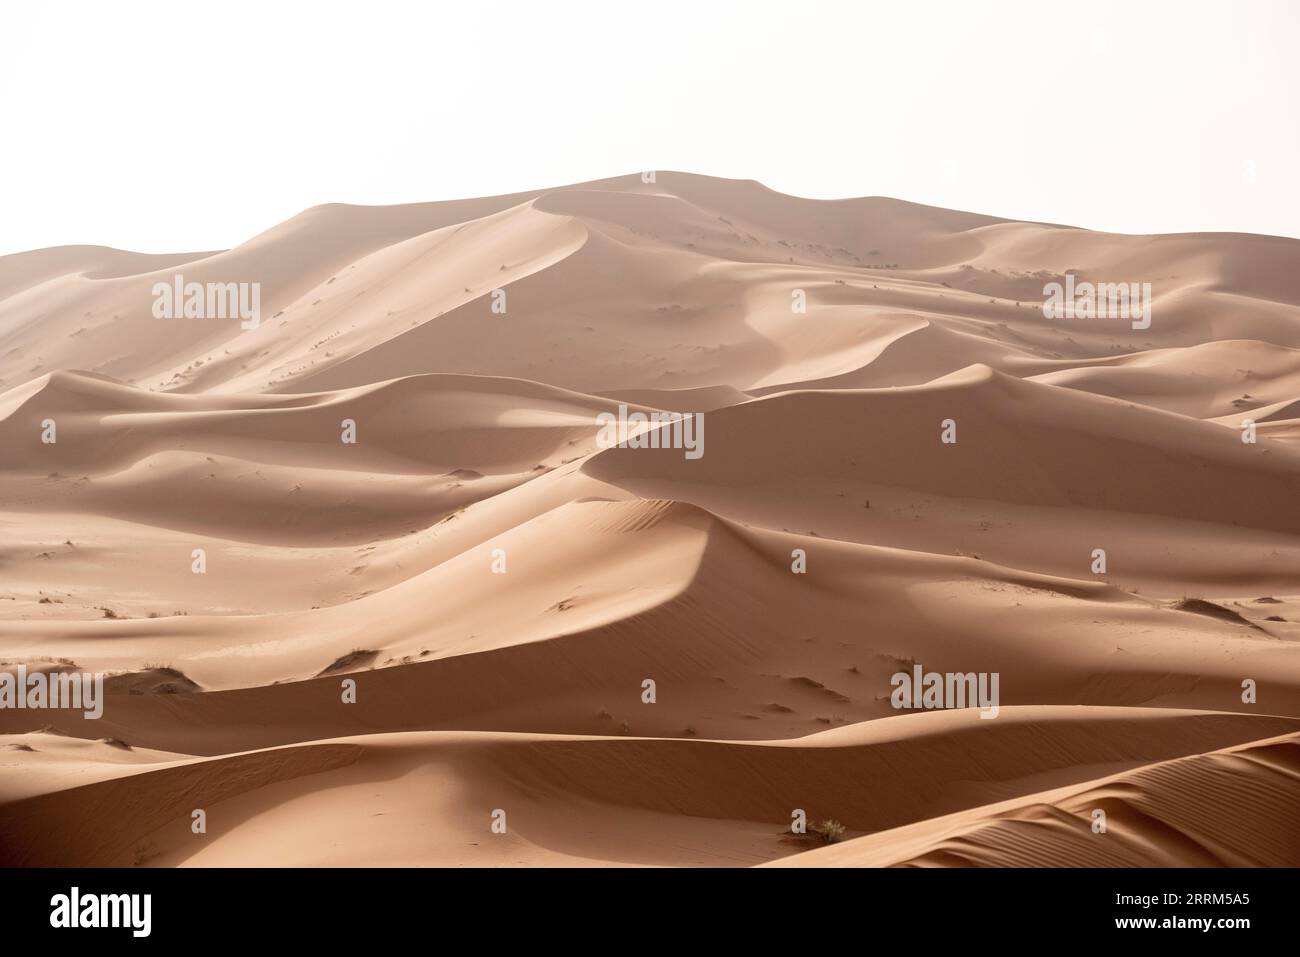 Picturesque dunes in the Erg Chebbi desert, part of the African Sahara, Morocco Stock Photo